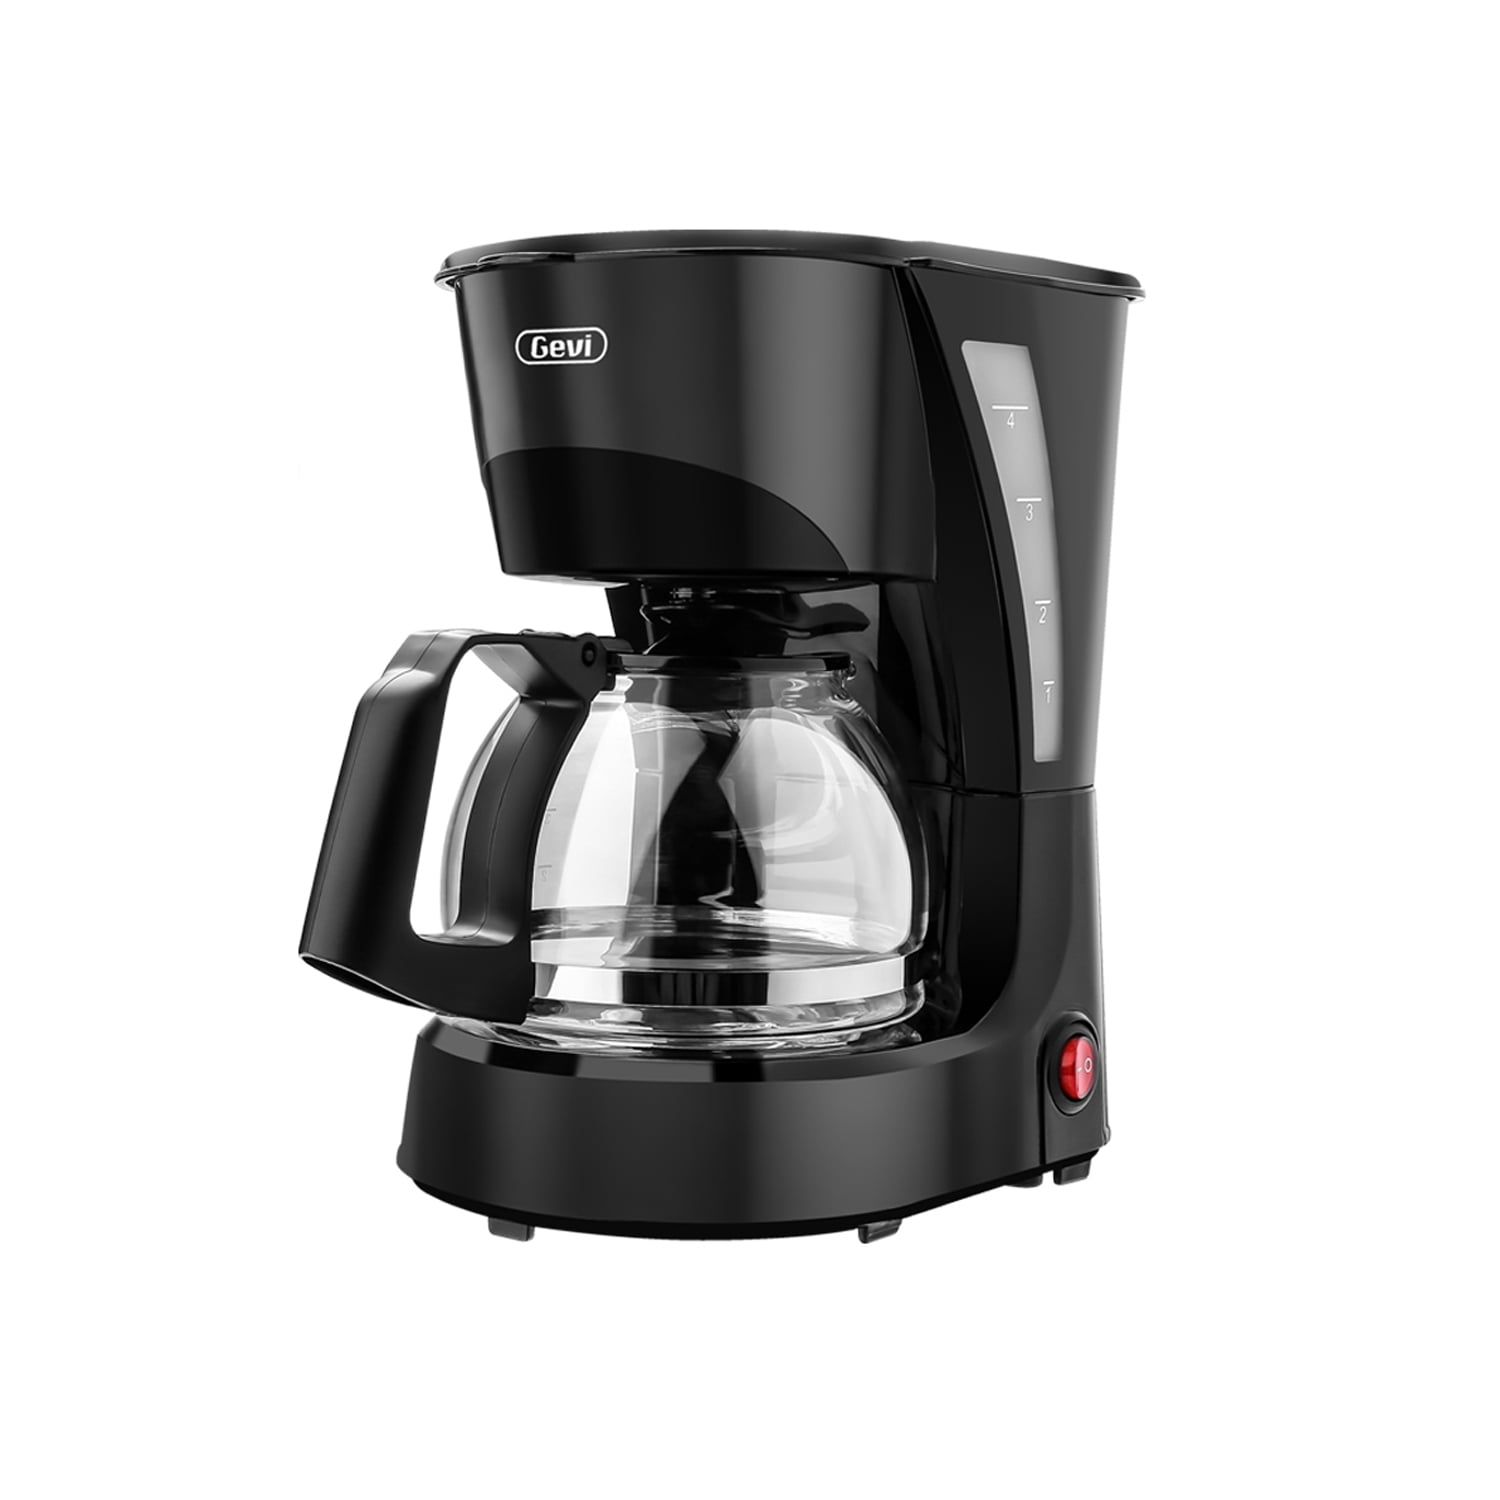 Drip Coffee Maker GEVI 4 Cup Coffee Machine Work in Silent Coffee Brewer with Coffee Pot and Filter for Home and Office